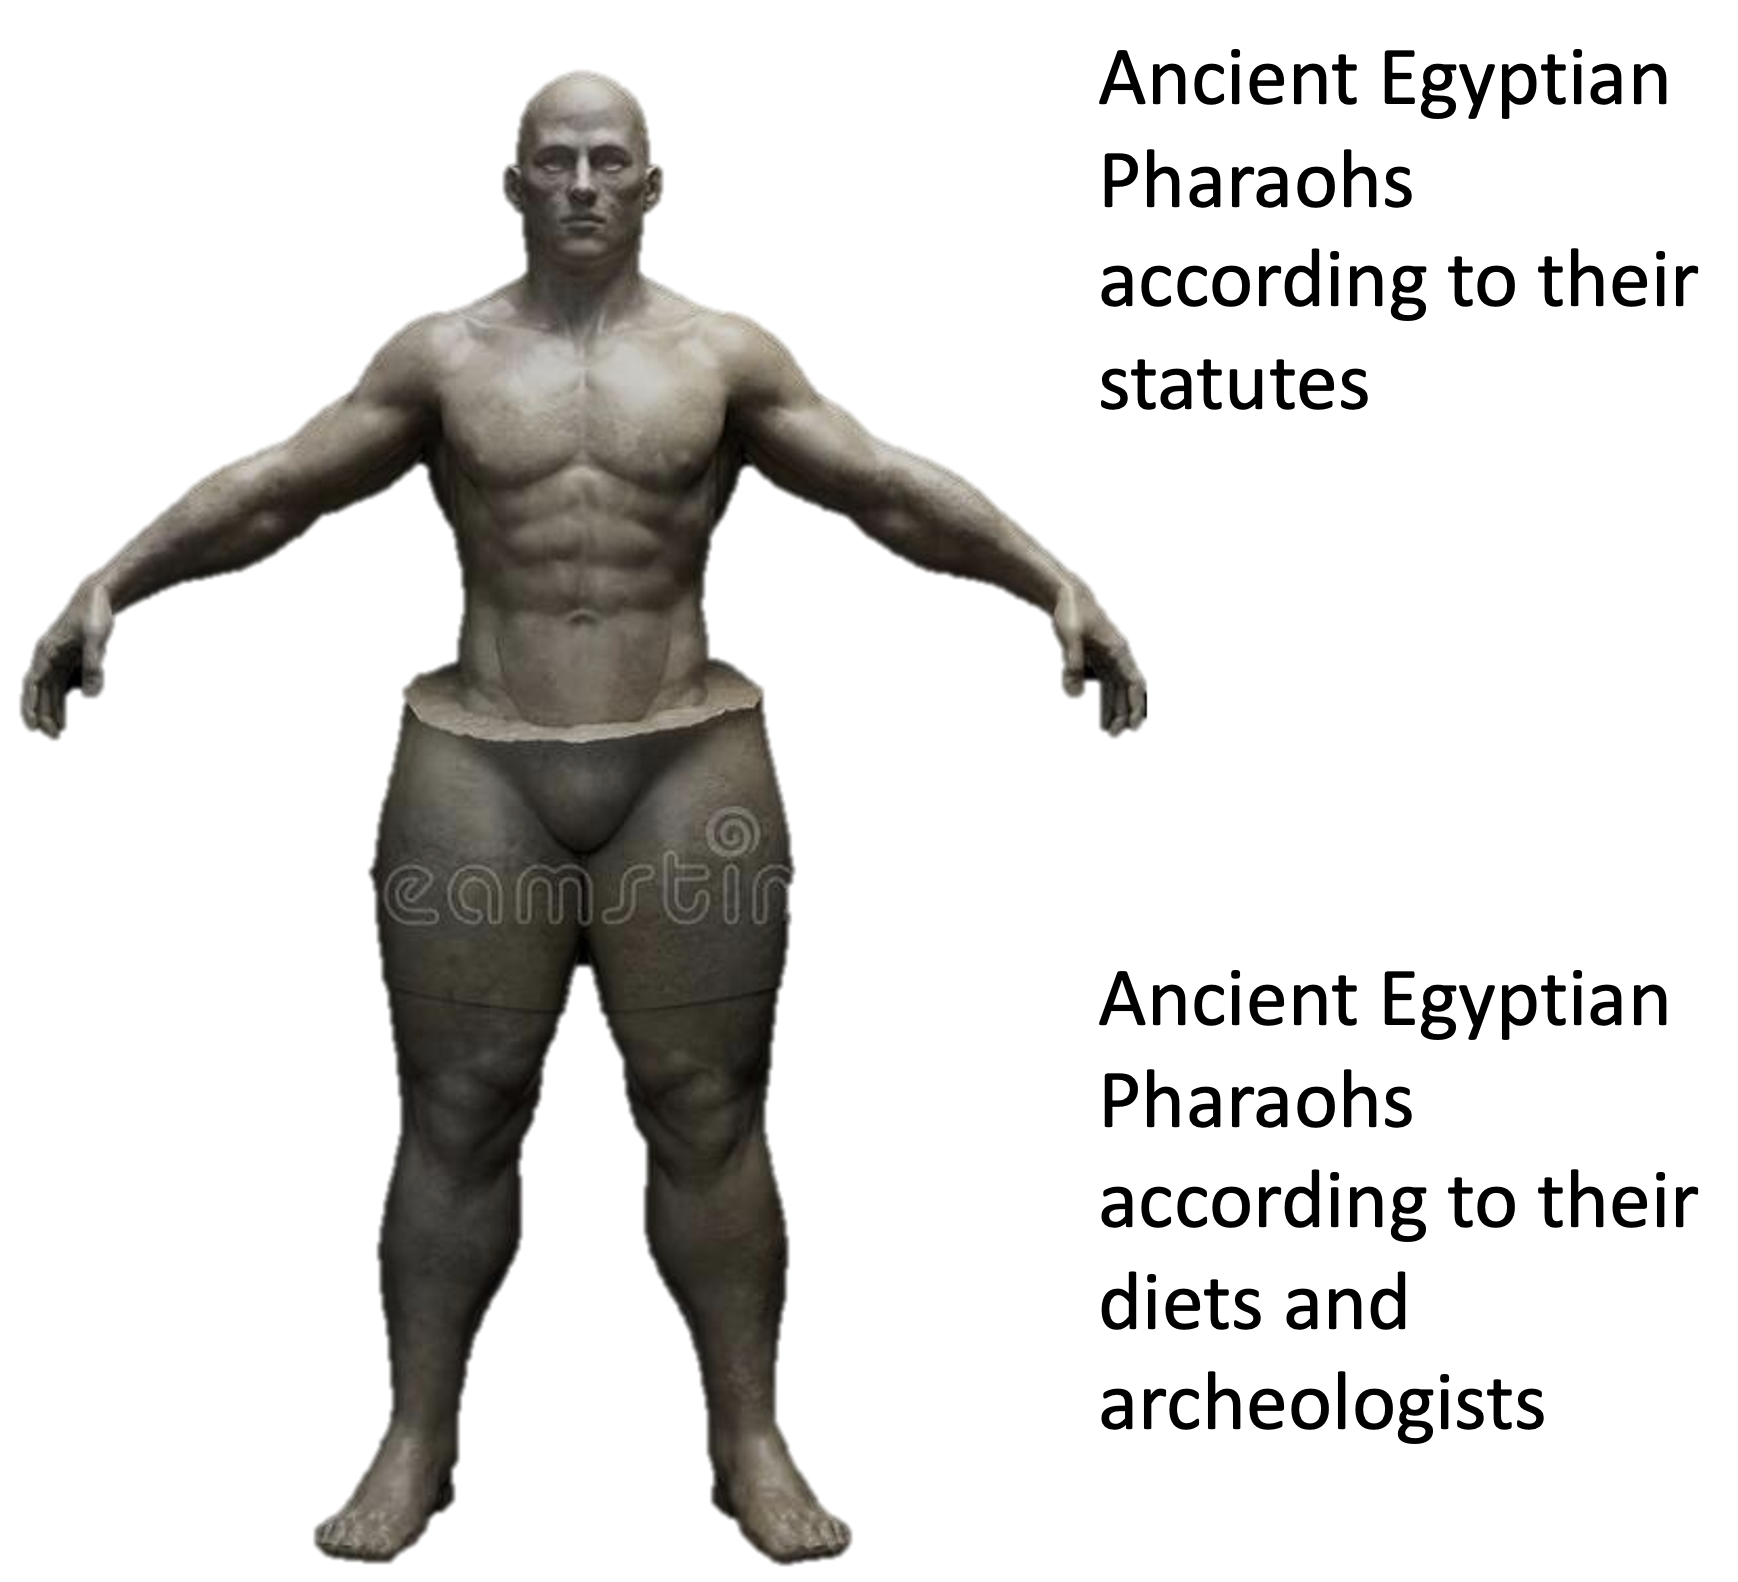 Many pharaohs and ancient Egyptian royals has diabetes and other obesity related health issues